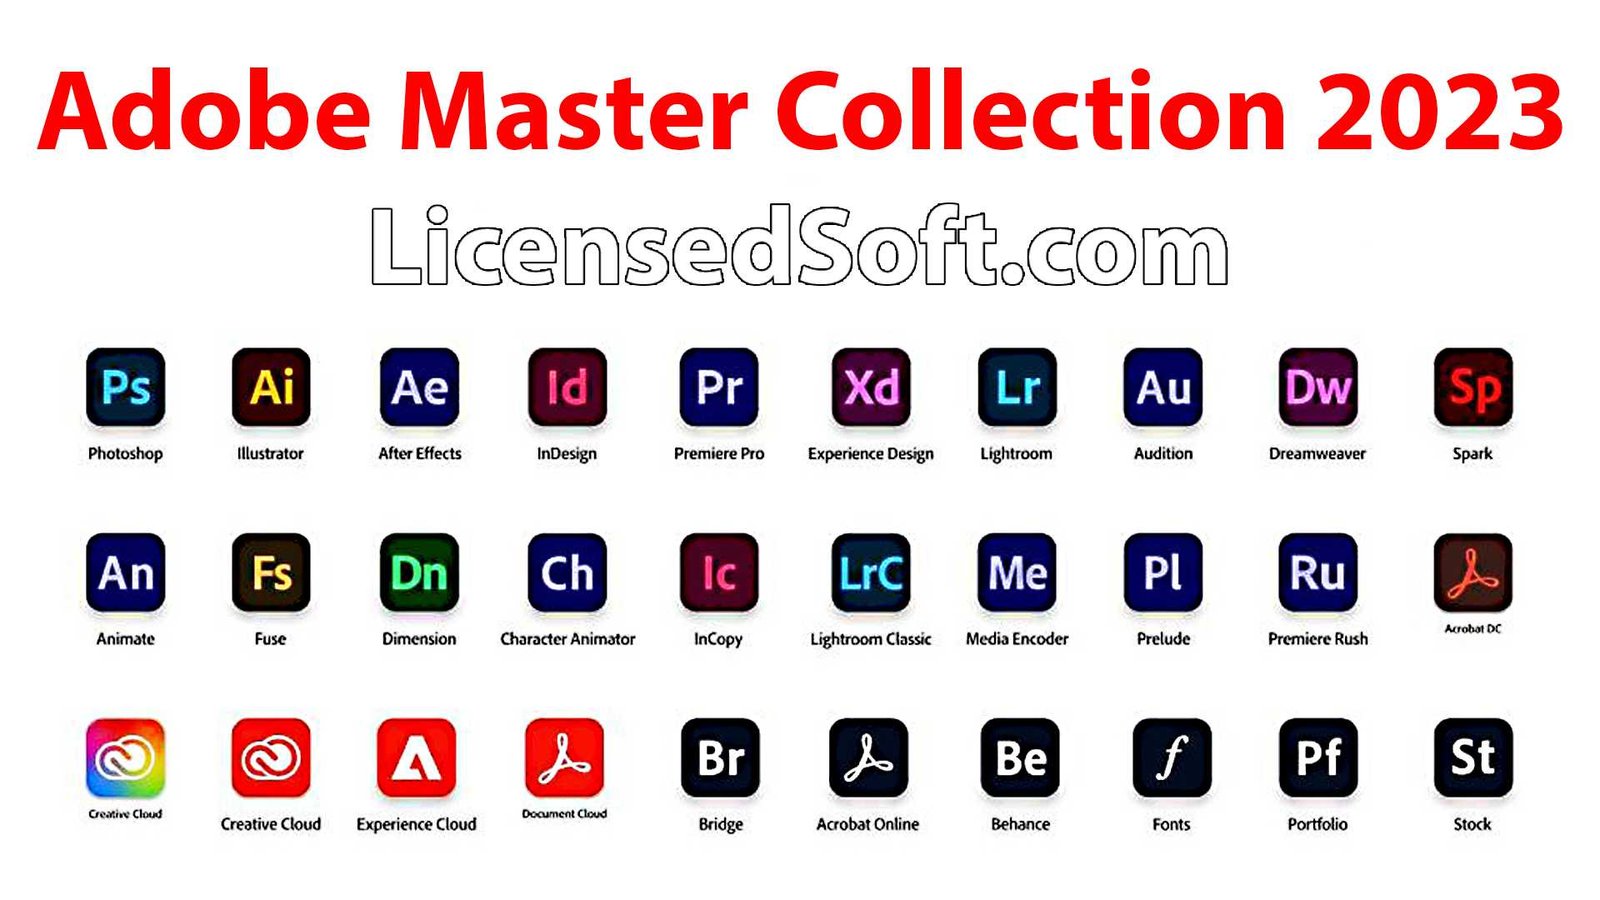 Adobe Master Collection 2023 Full Preactivated Cover Image By LicensedSoft